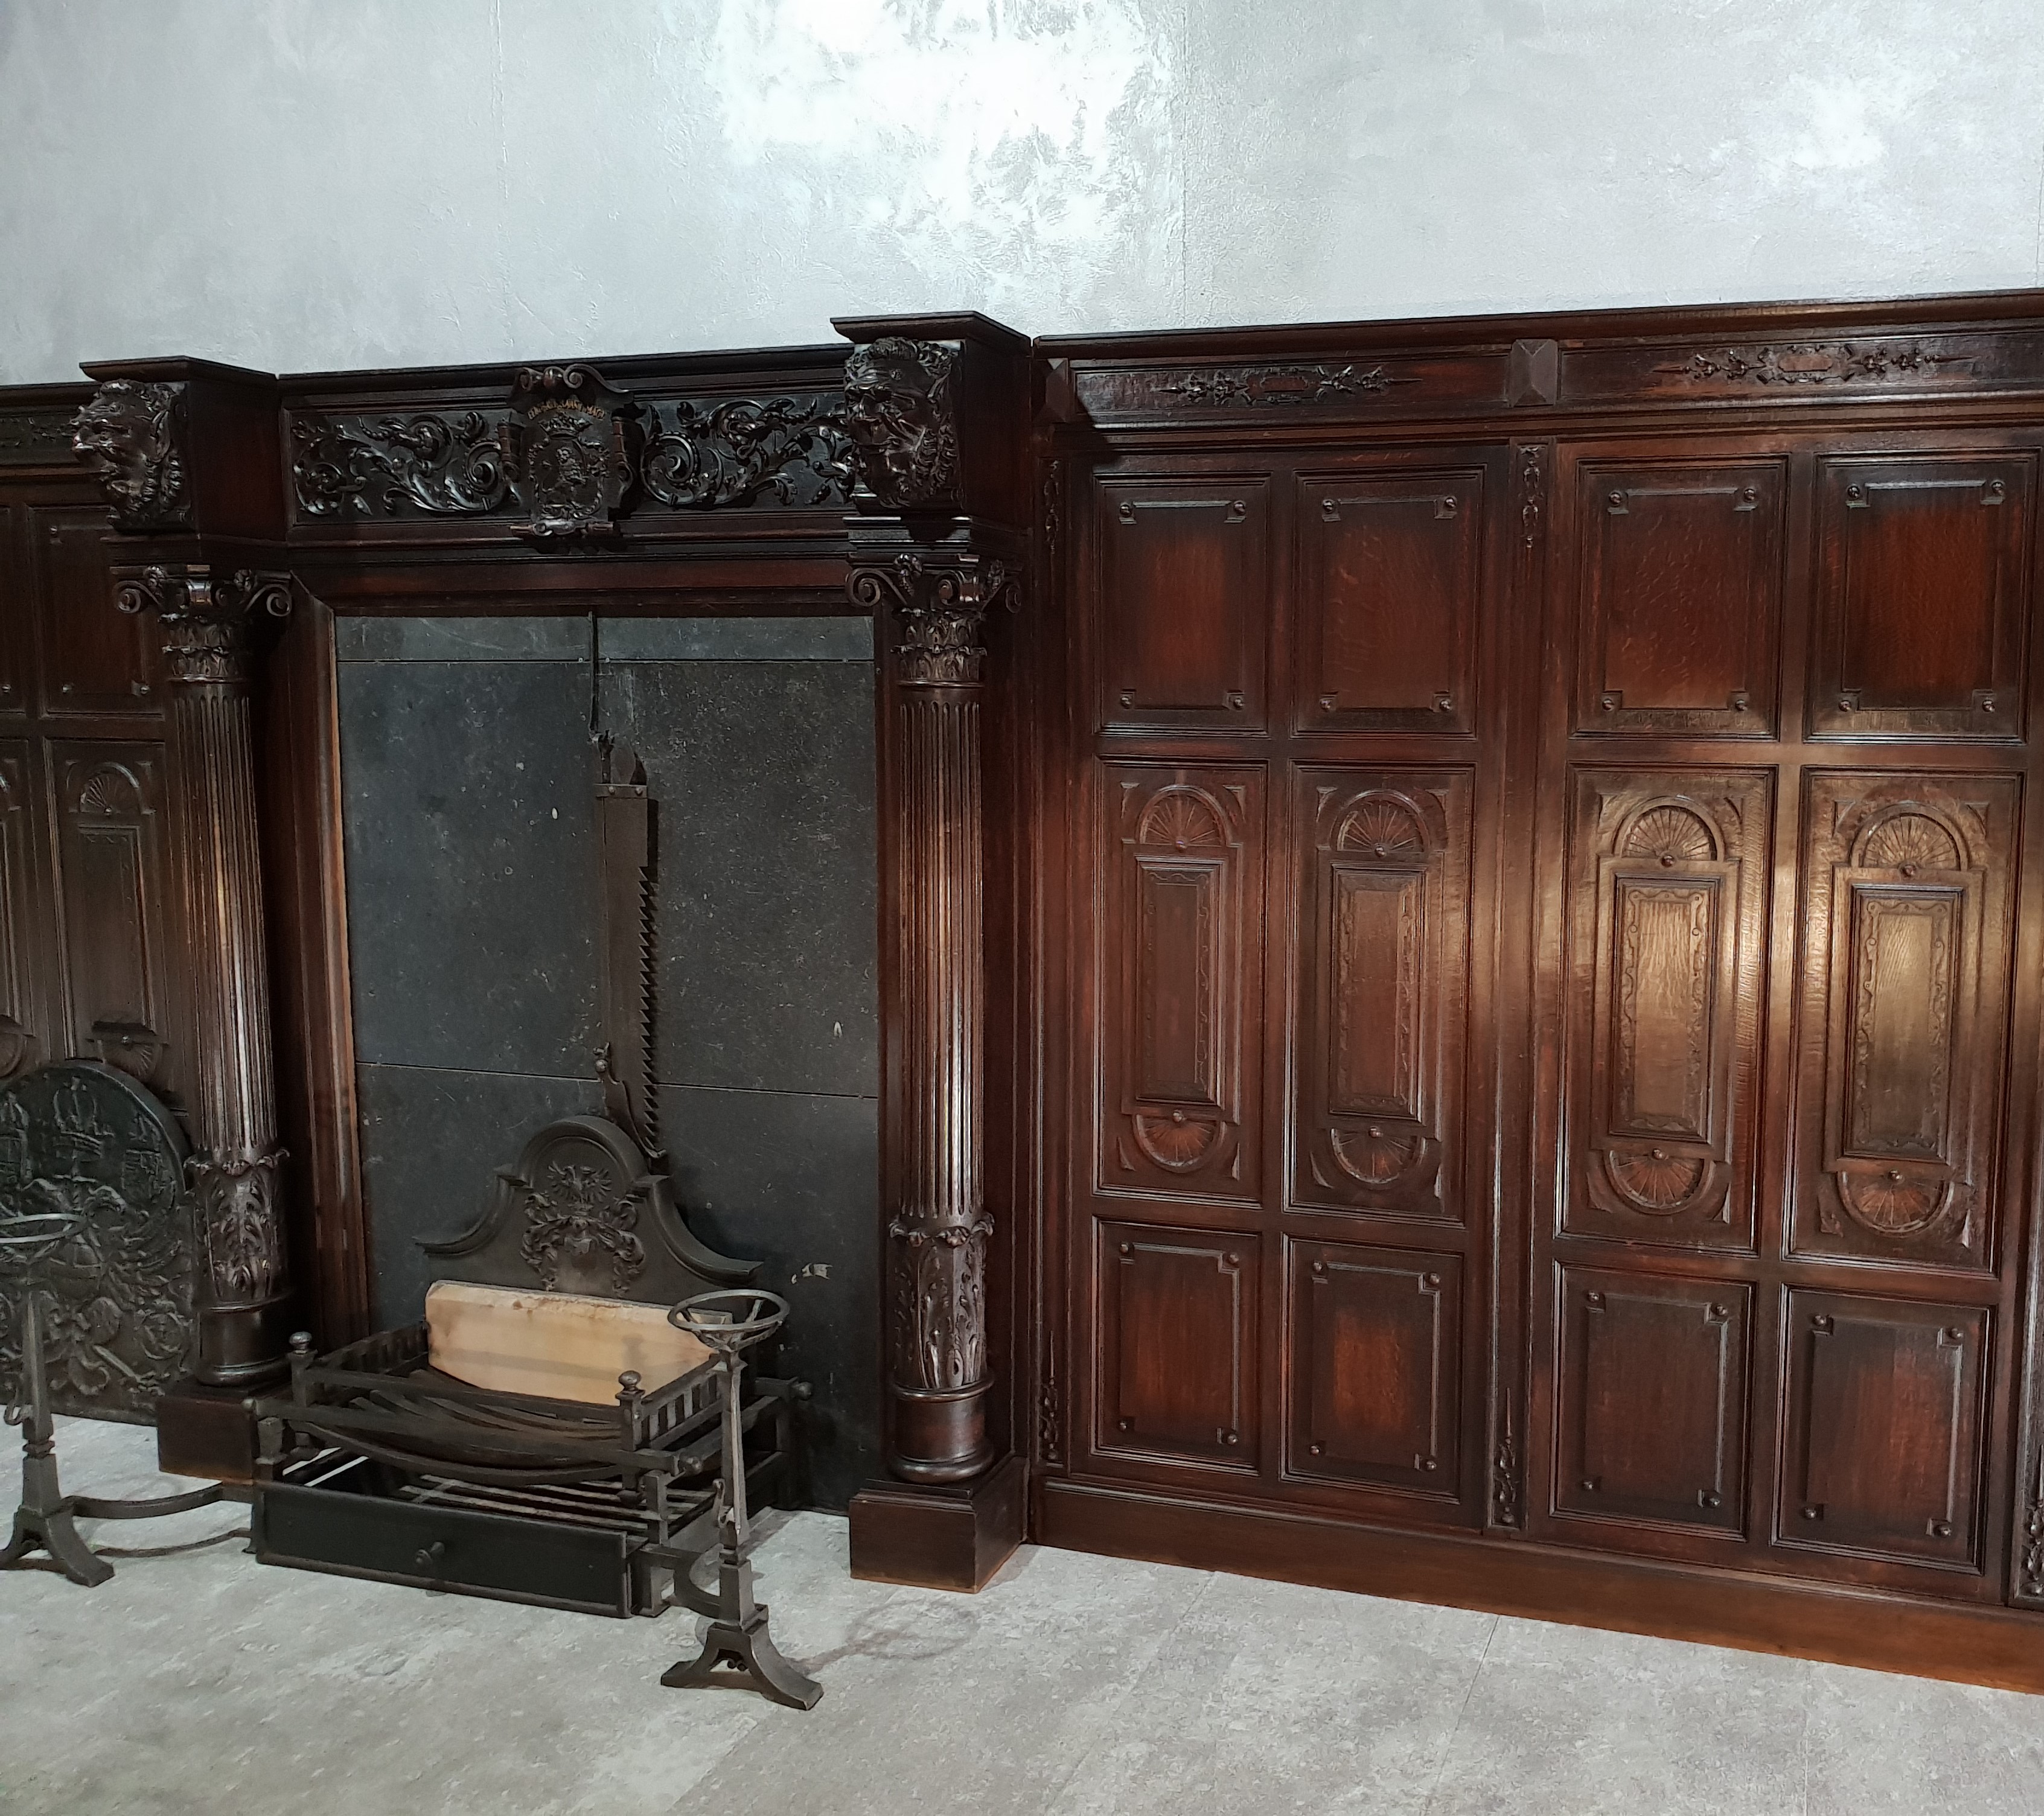 Antique Dutch fireplace with wall panels